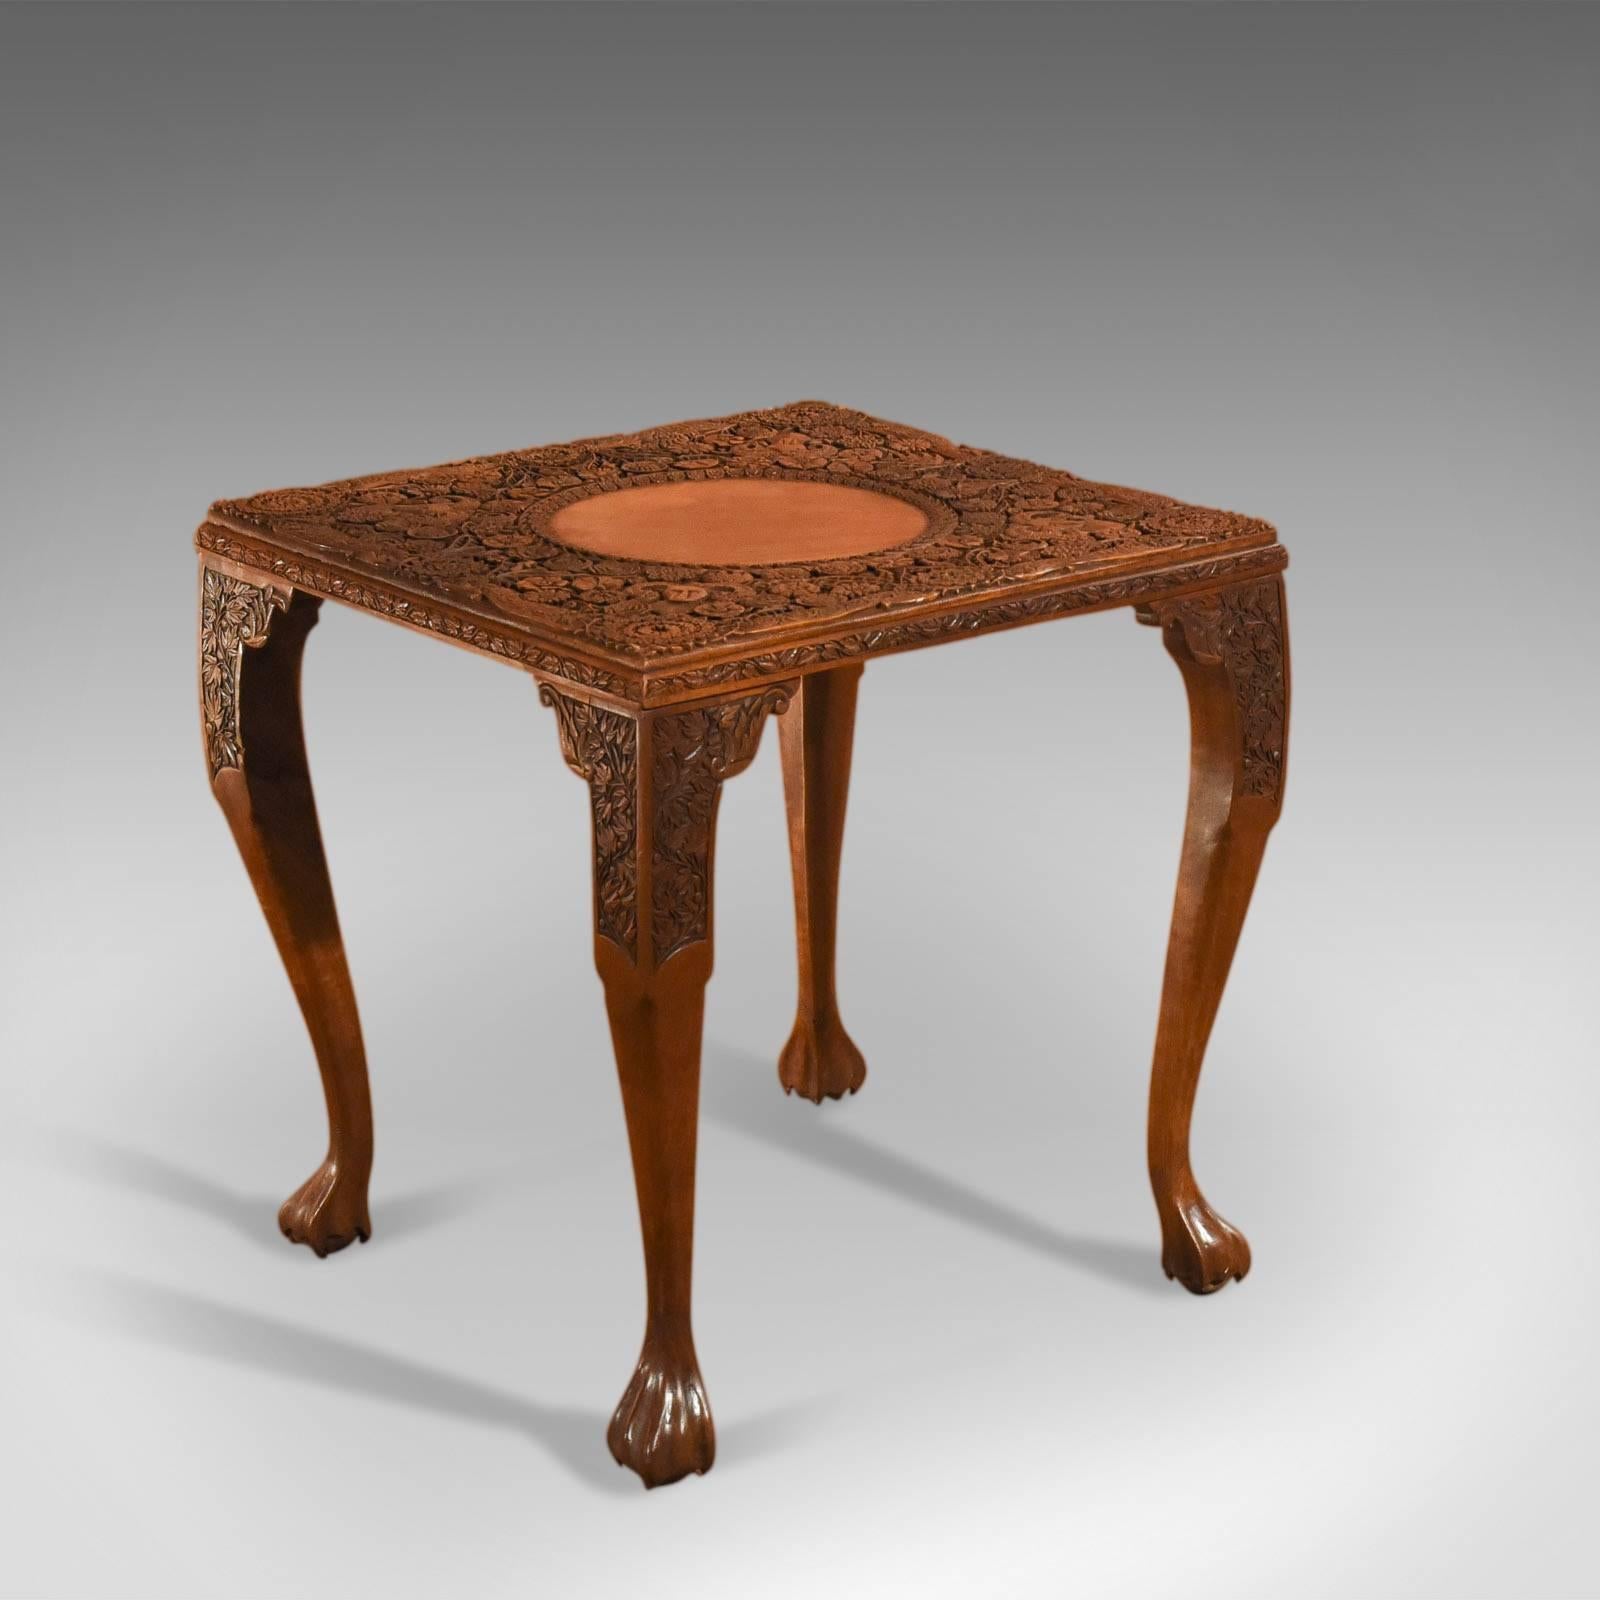 This is an antique, Victorian tea table dating to circa 1900.

Based around symmetrical anchors of radial decoration at the corners and mid points, bearded goats heads and the inner ring of flower heads, the profusely carved rosettes vary in